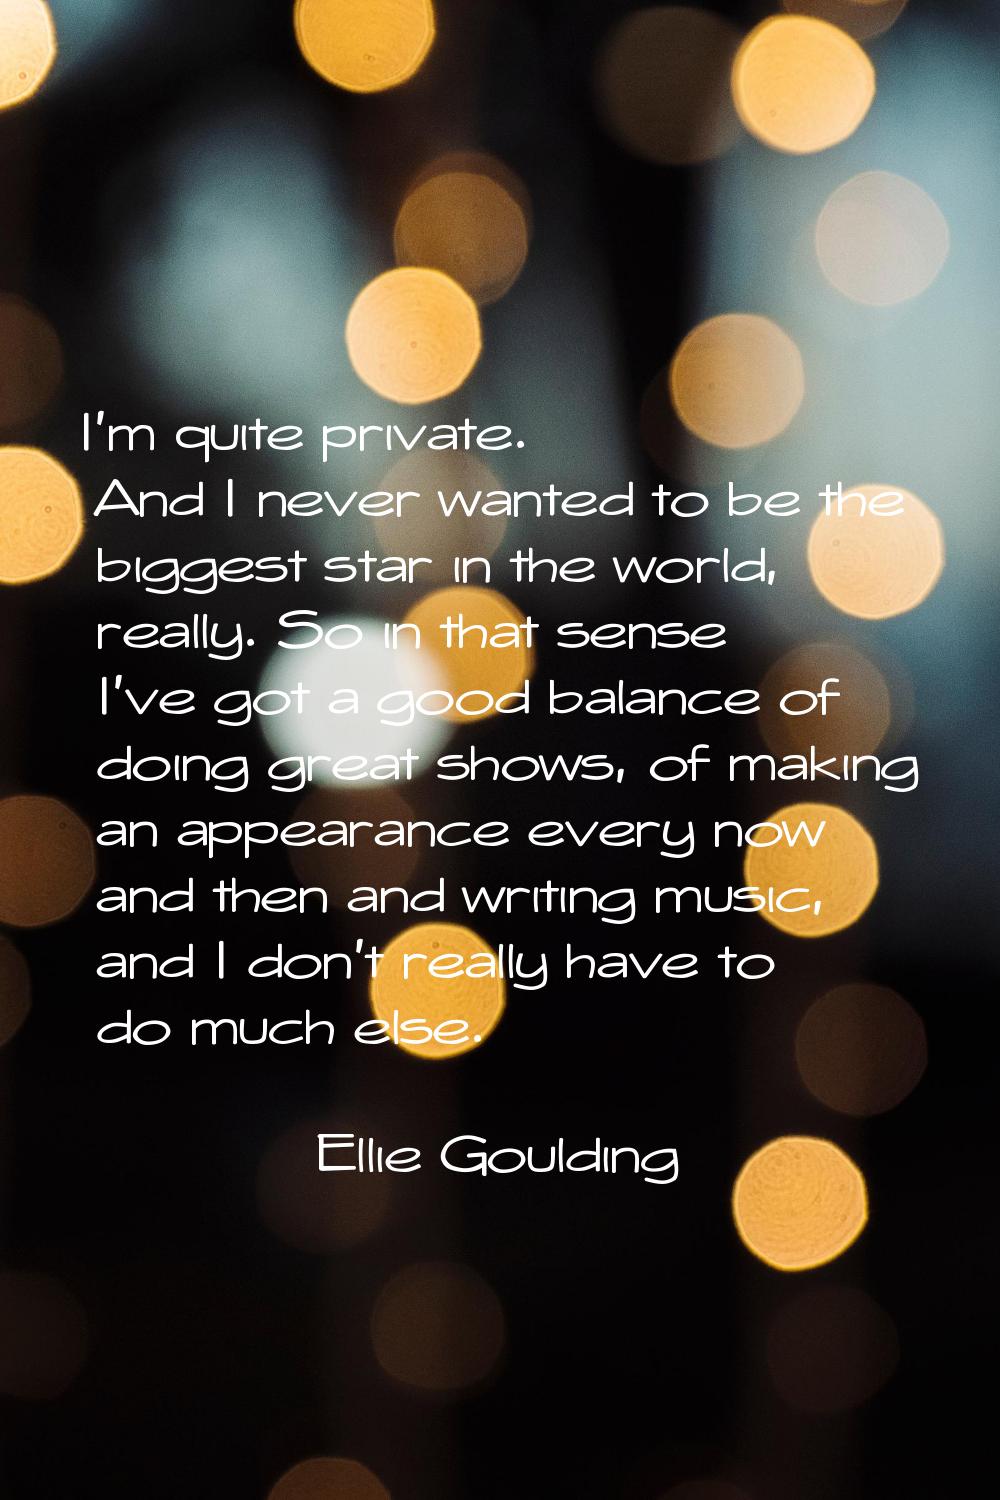 I'm quite private. And I never wanted to be the biggest star in the world, really. So in that sense